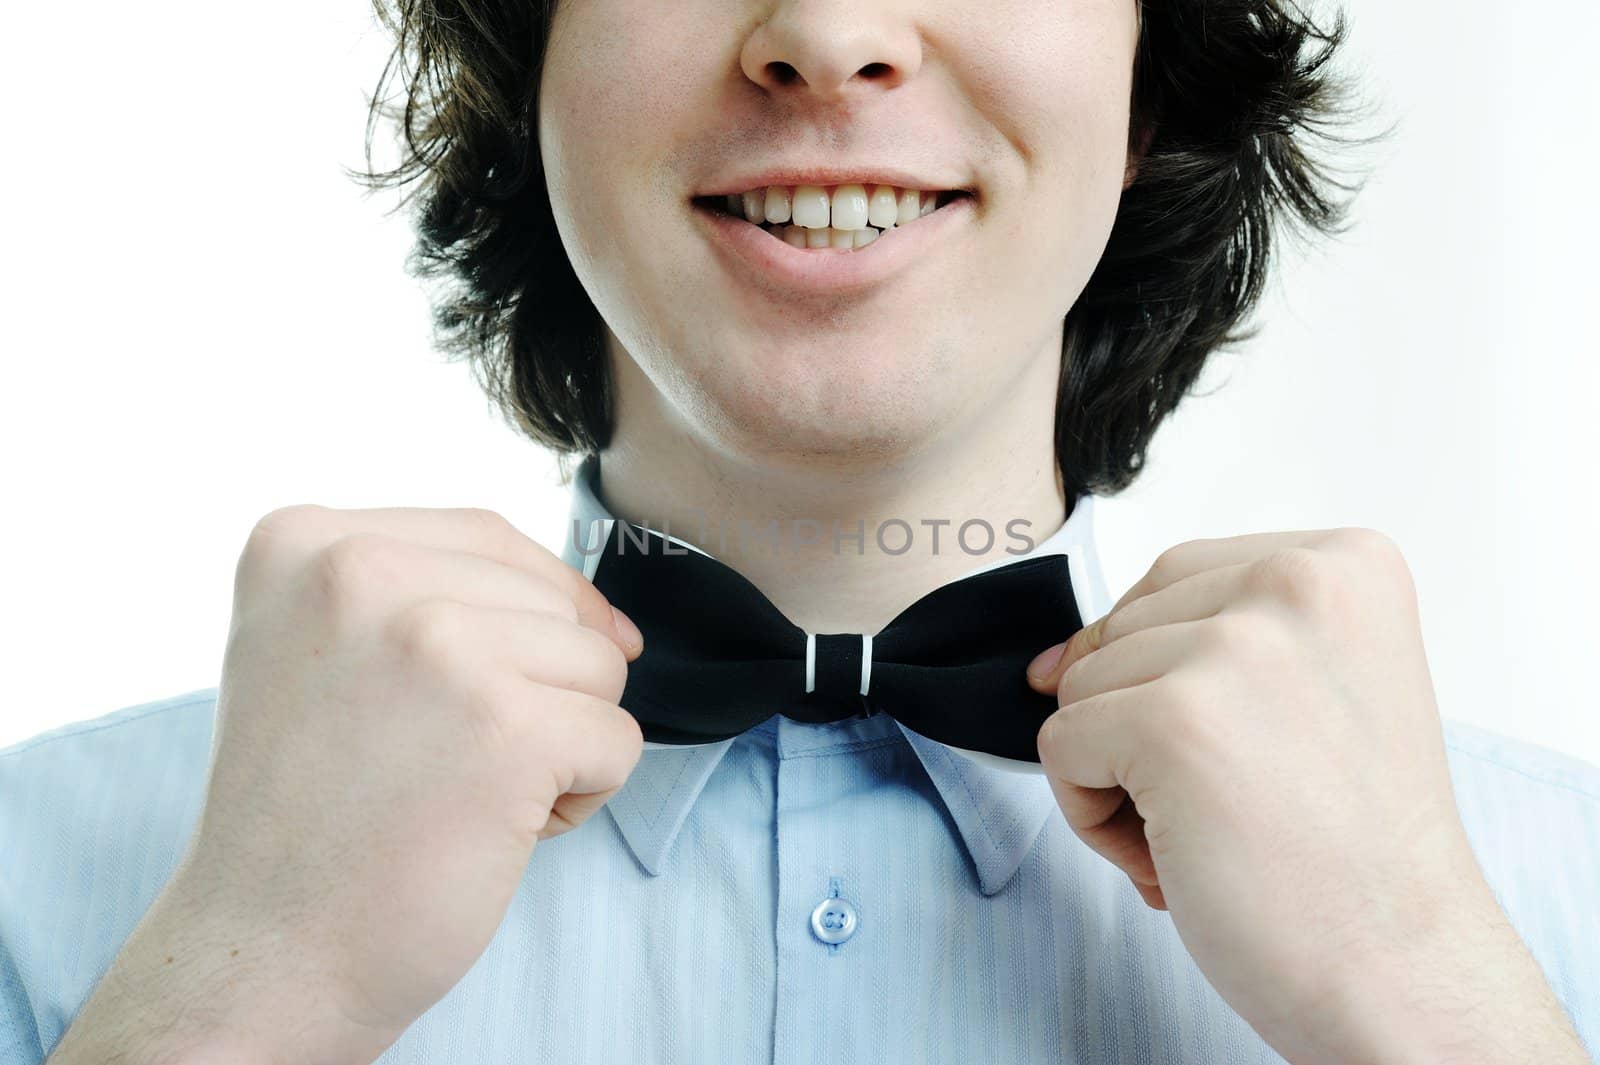 An image of a young waiter touching his tie